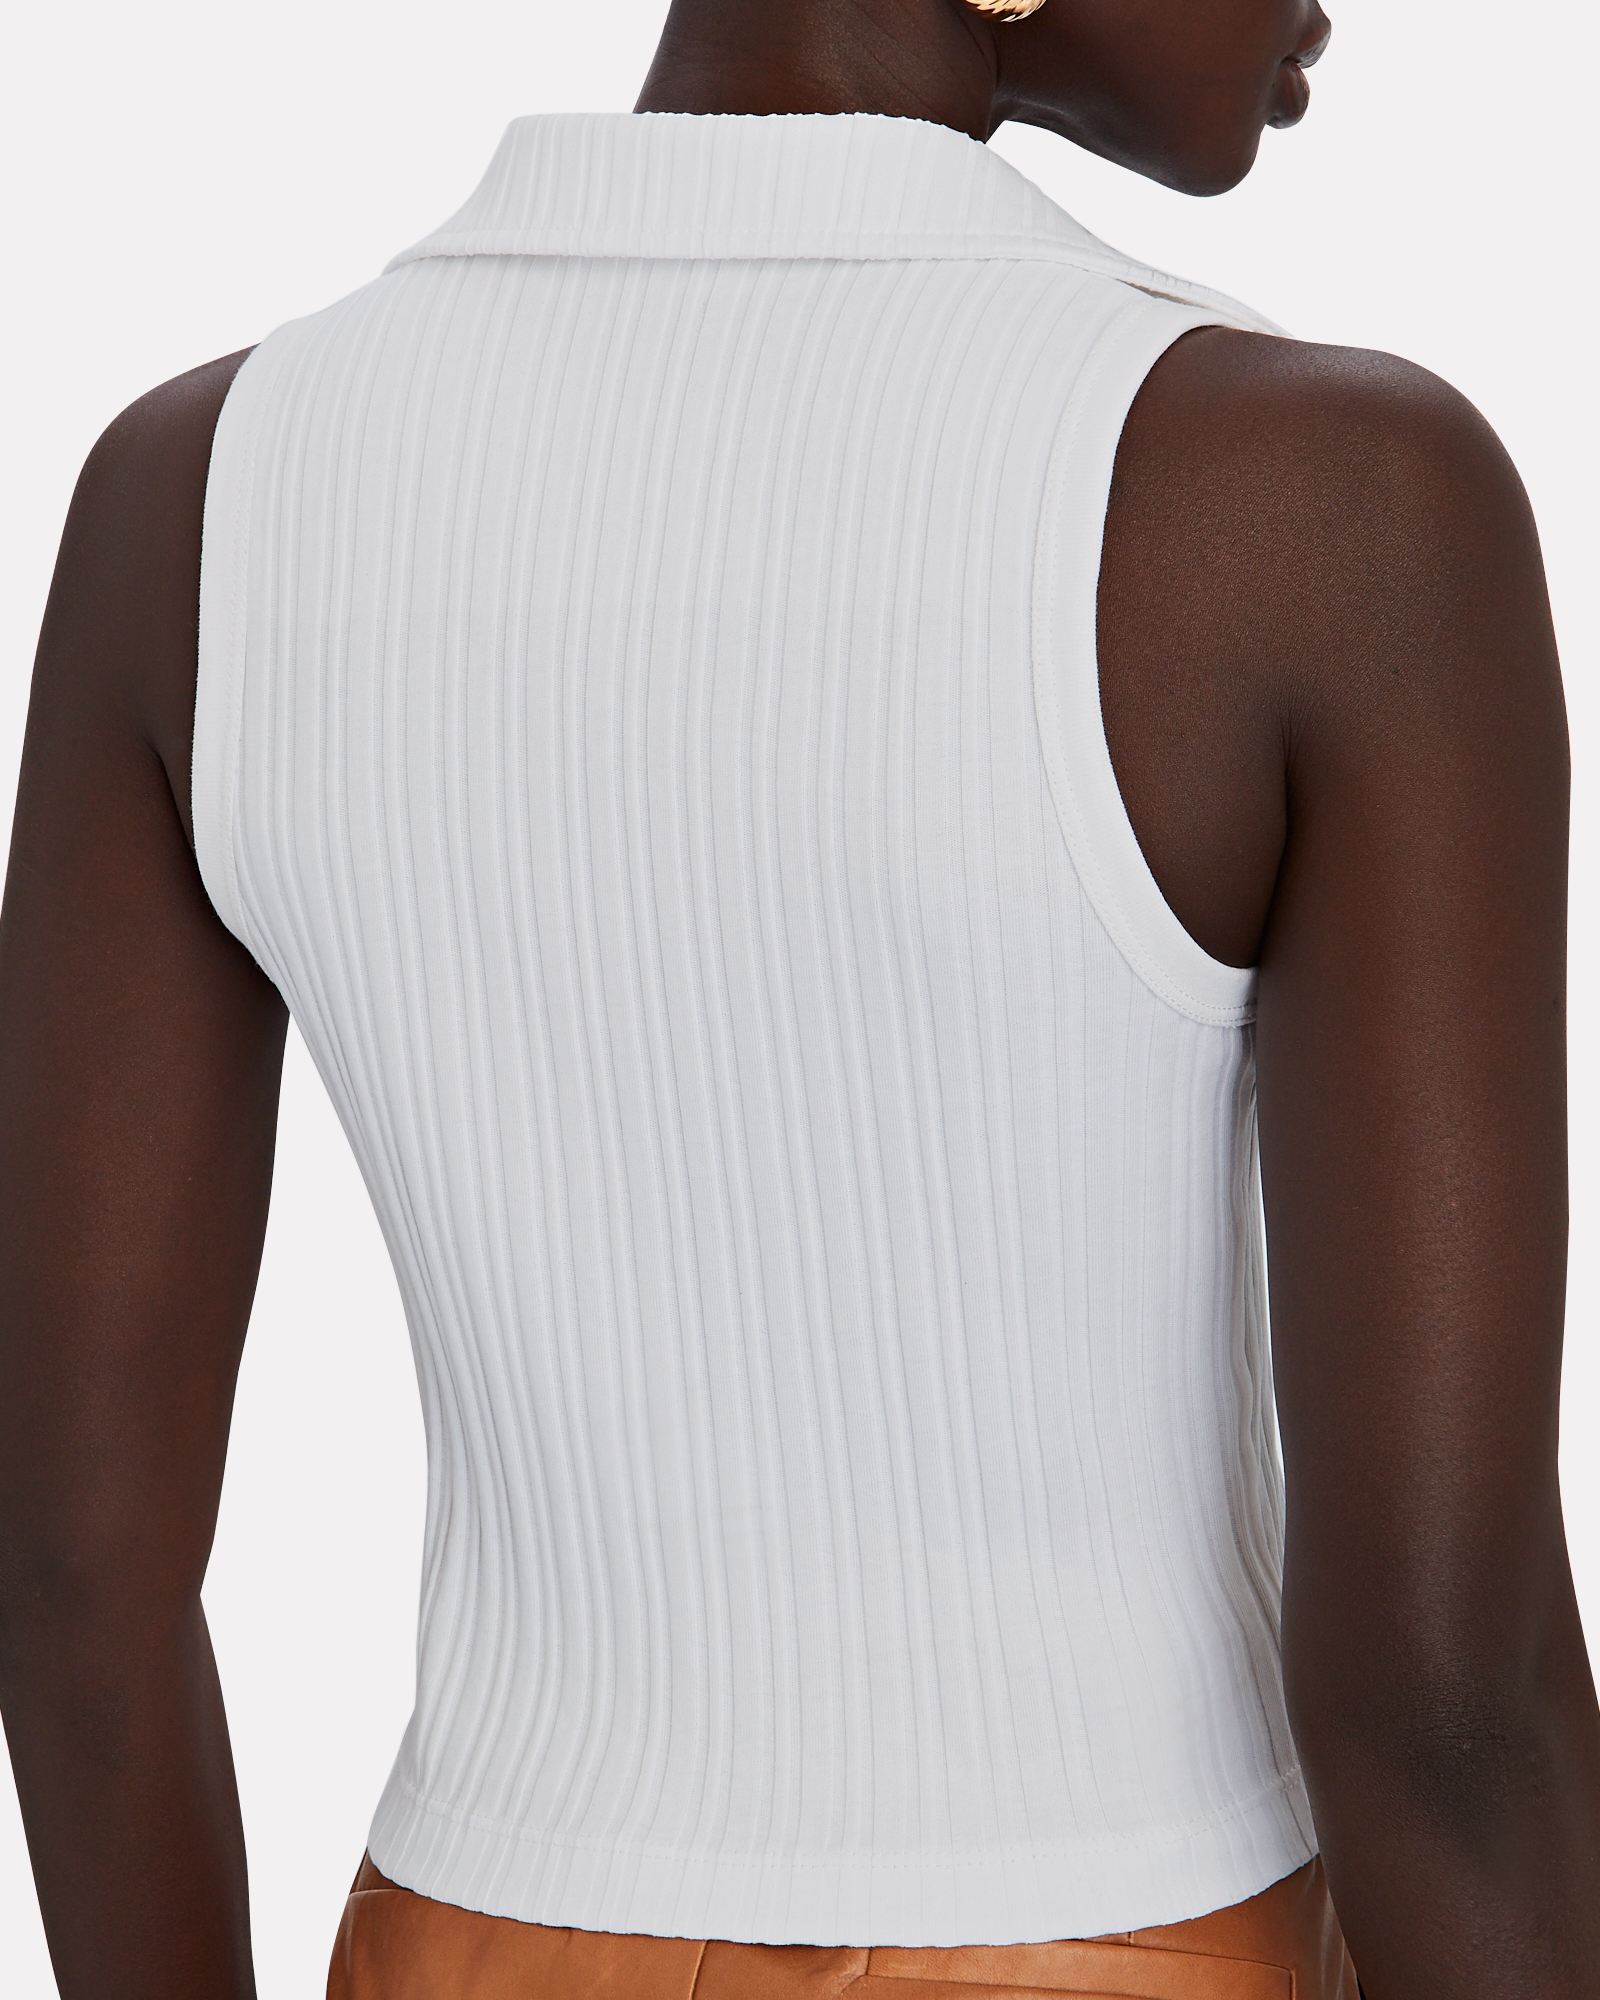 Helmut Lang Cropped Sleeveless Polo Top | INTERMIX®